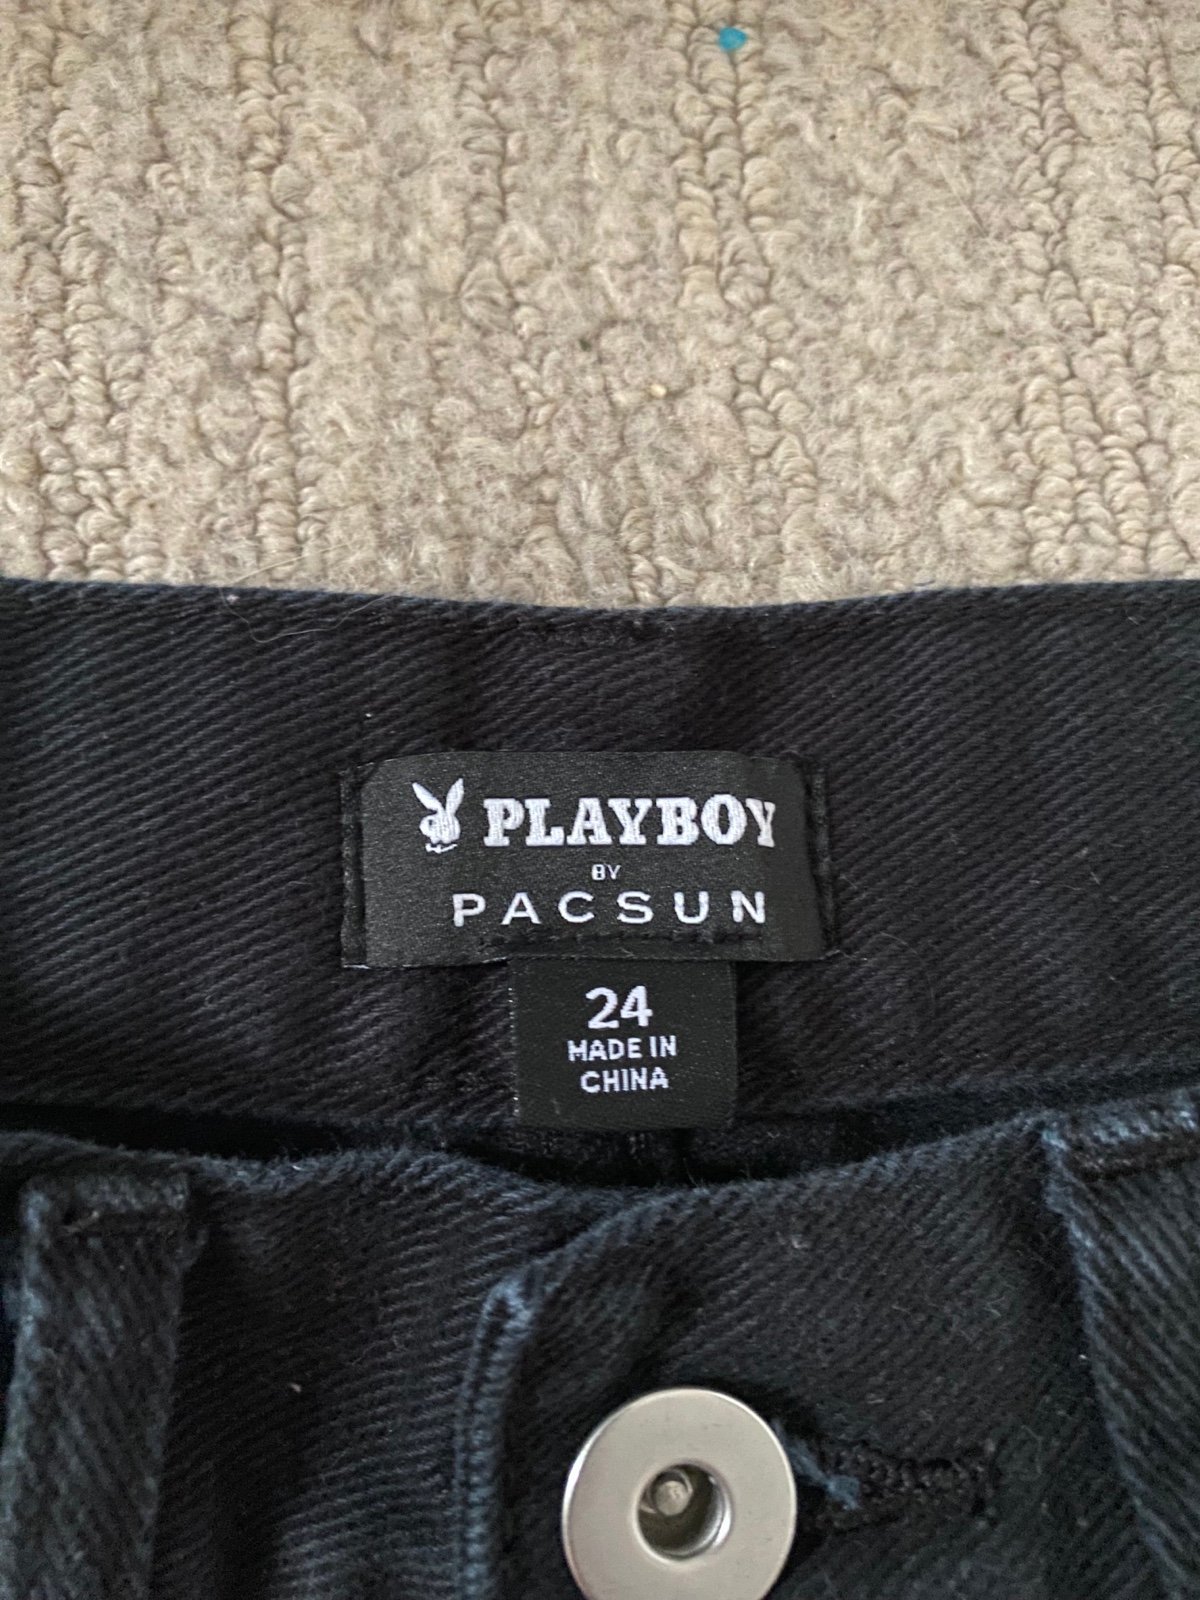 Fashion playboy PacSun jeans HCWuGr20Y US Outlet